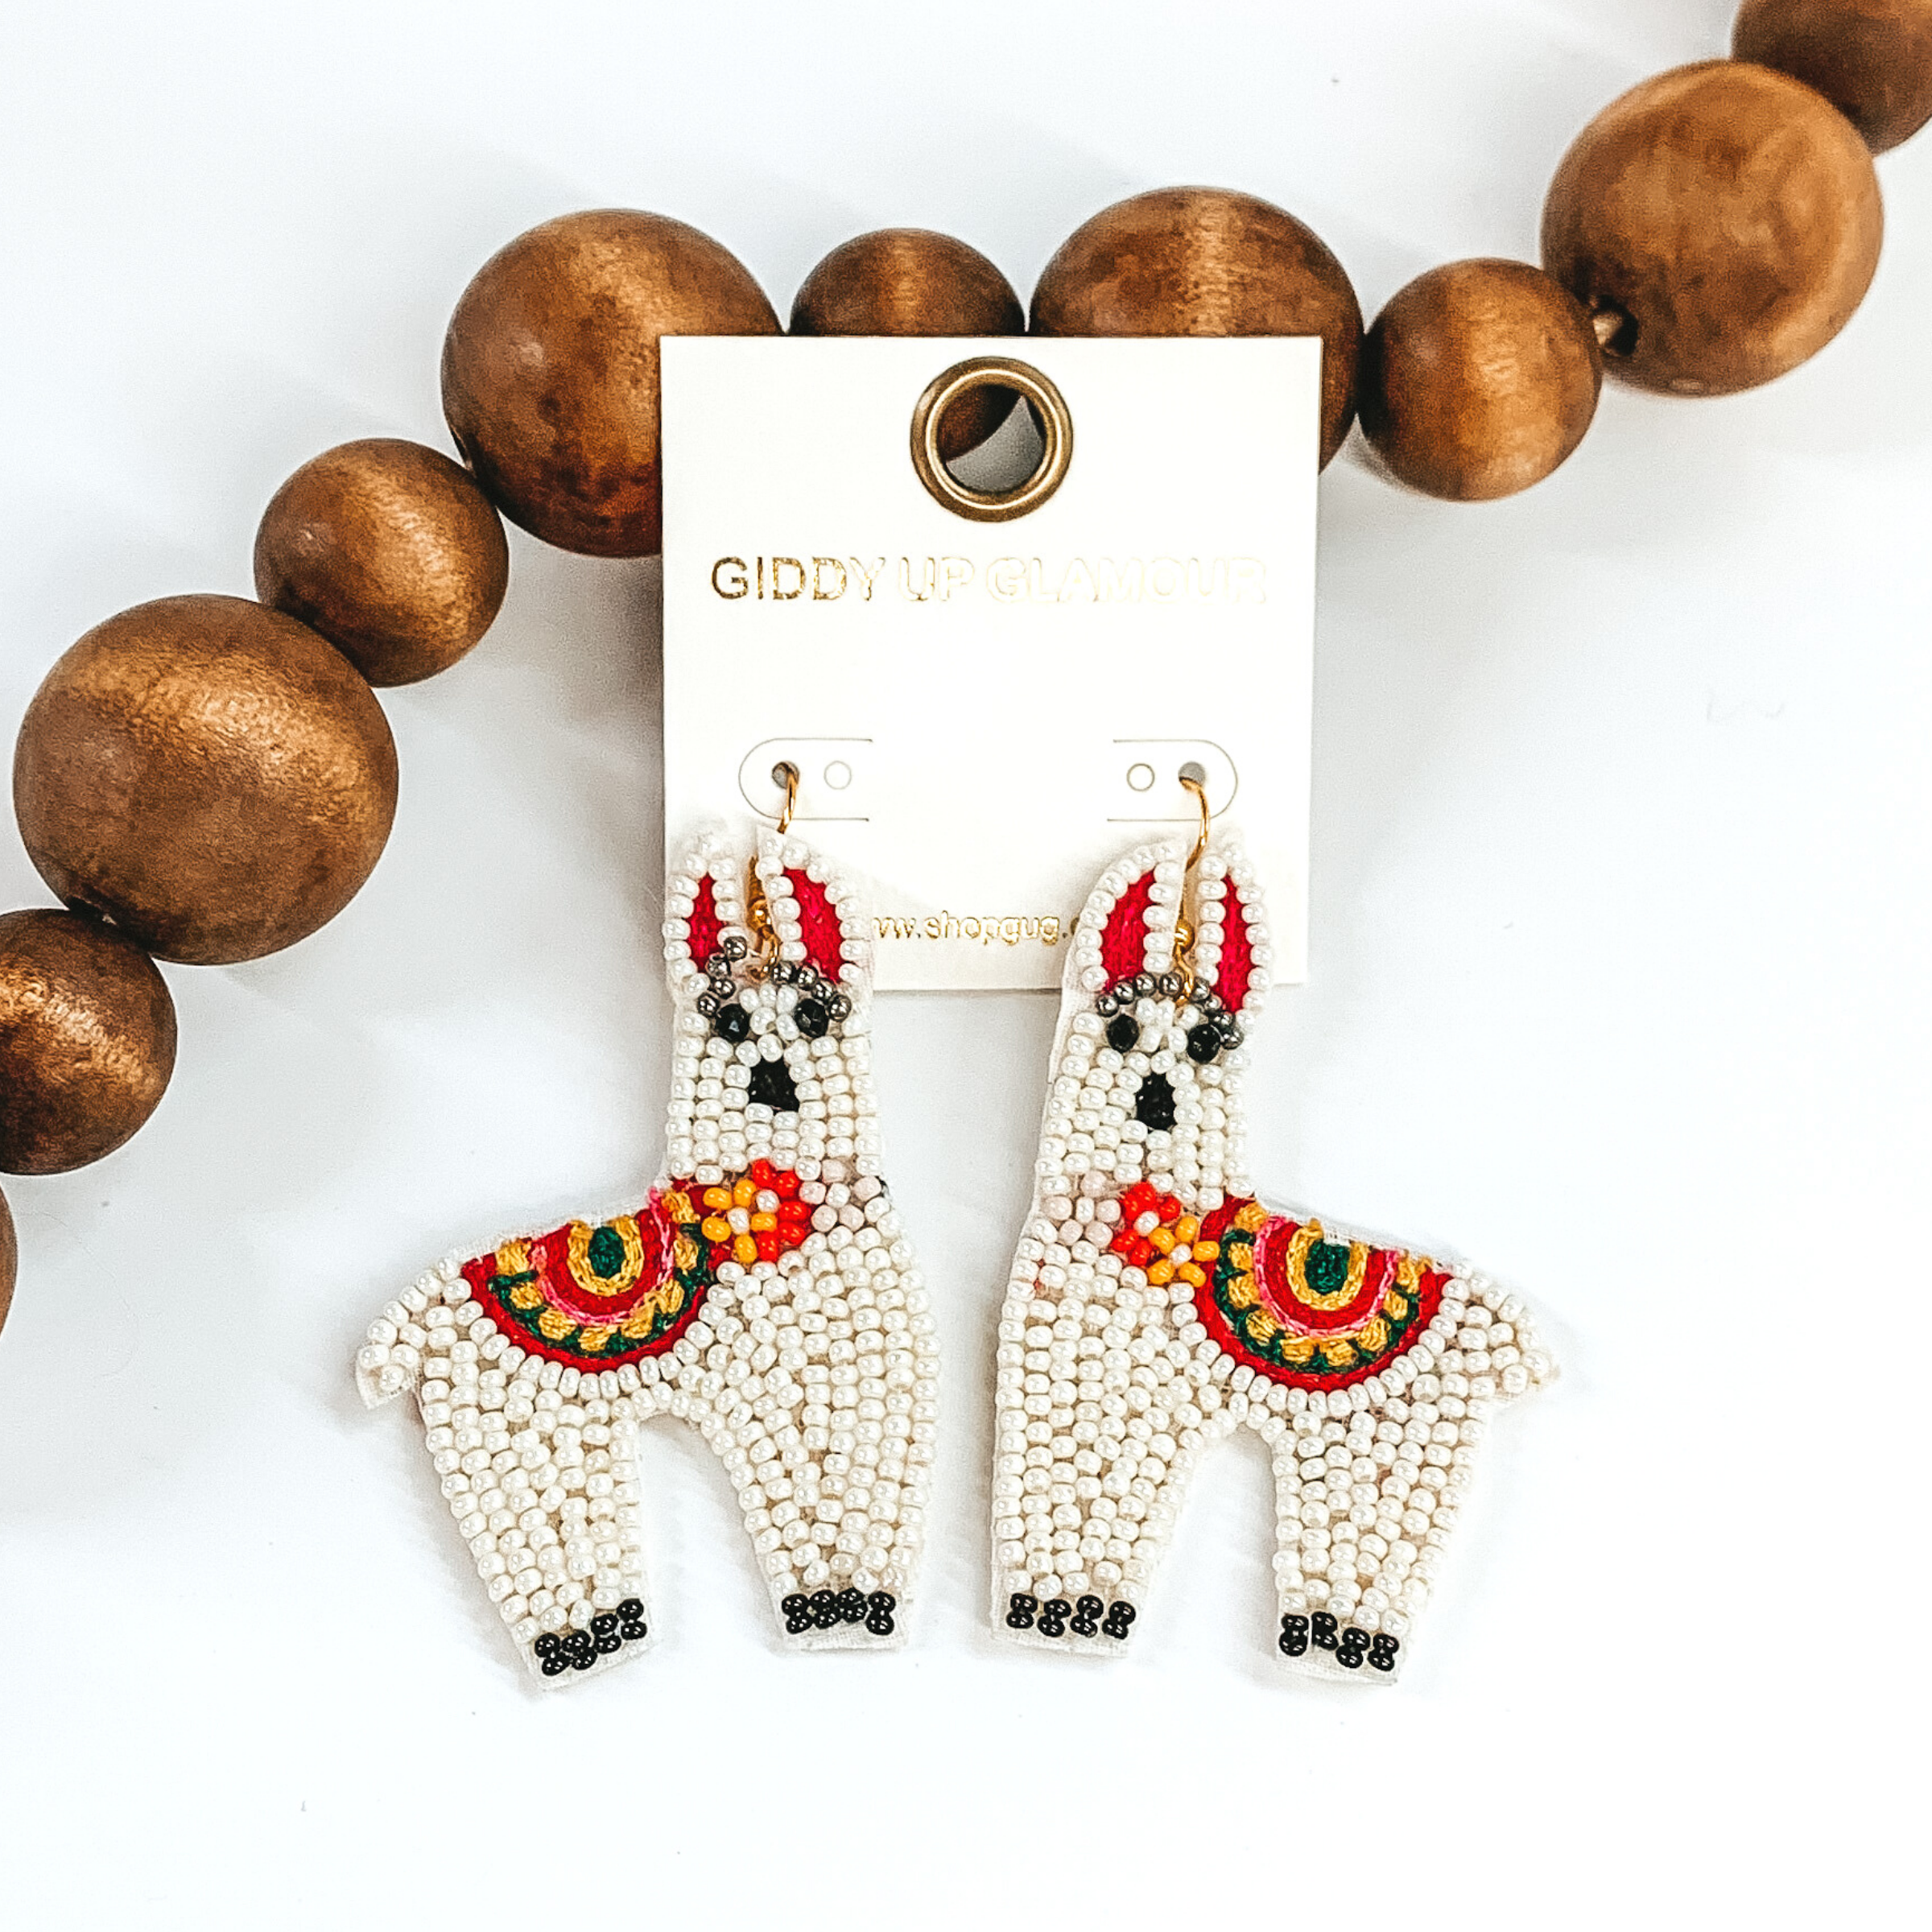 Llama shaped beaded dangle earrings in ivory. These earrings also includes some colorful stitching details. These earrings are pictured on a white background with dark brown beads towards the top of the picture.